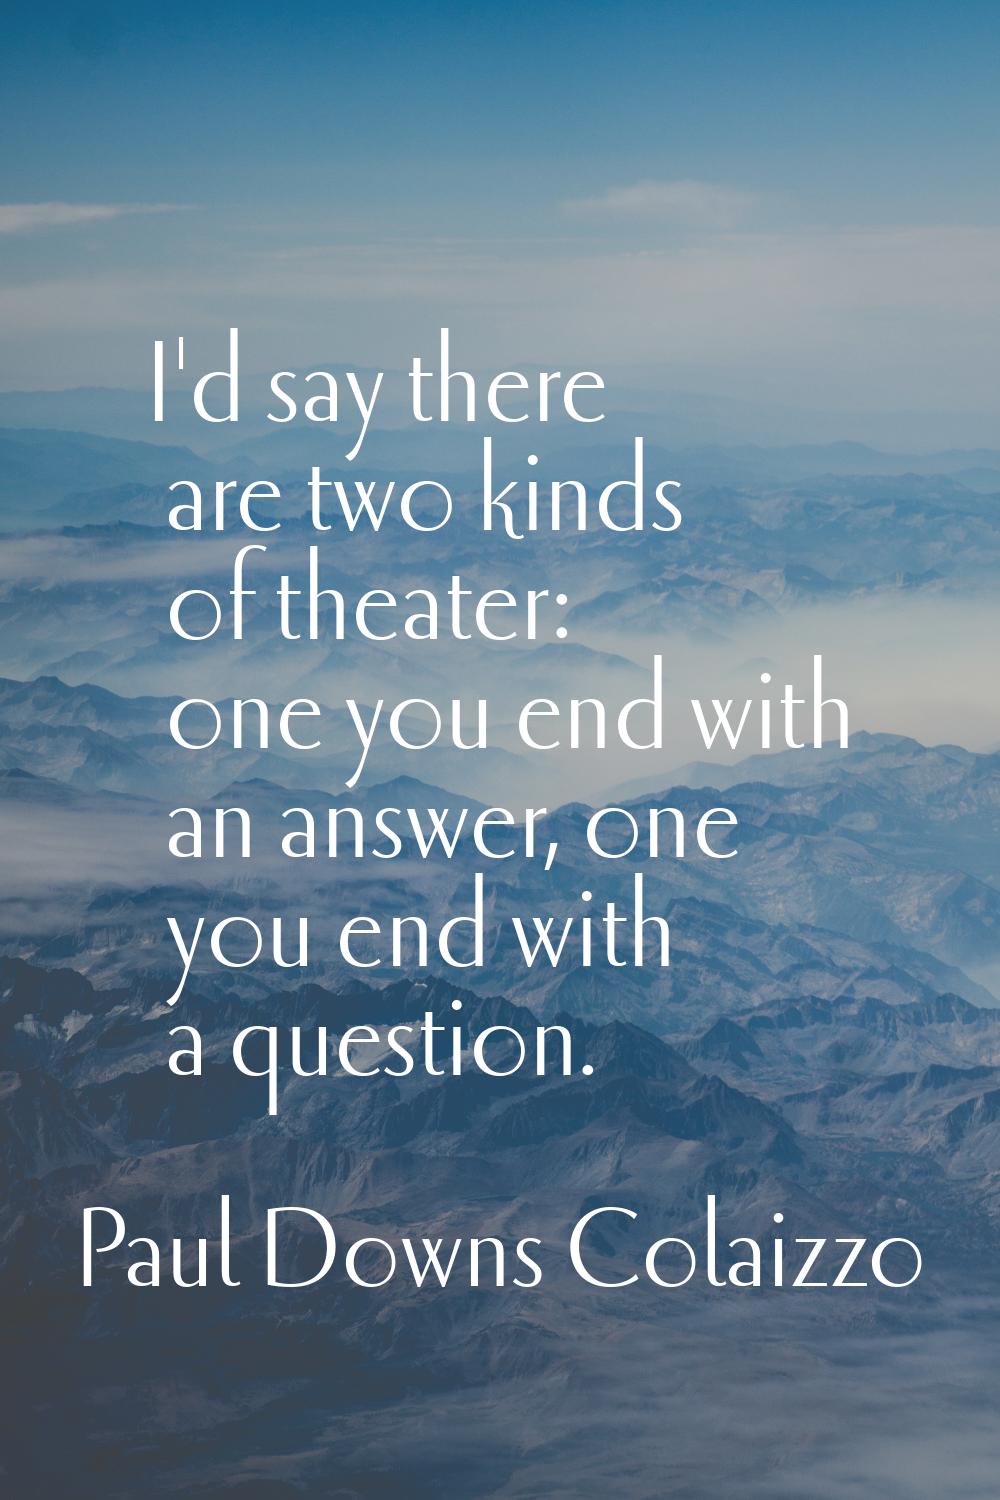 I'd say there are two kinds of theater: one you end with an answer, one you end with a question.